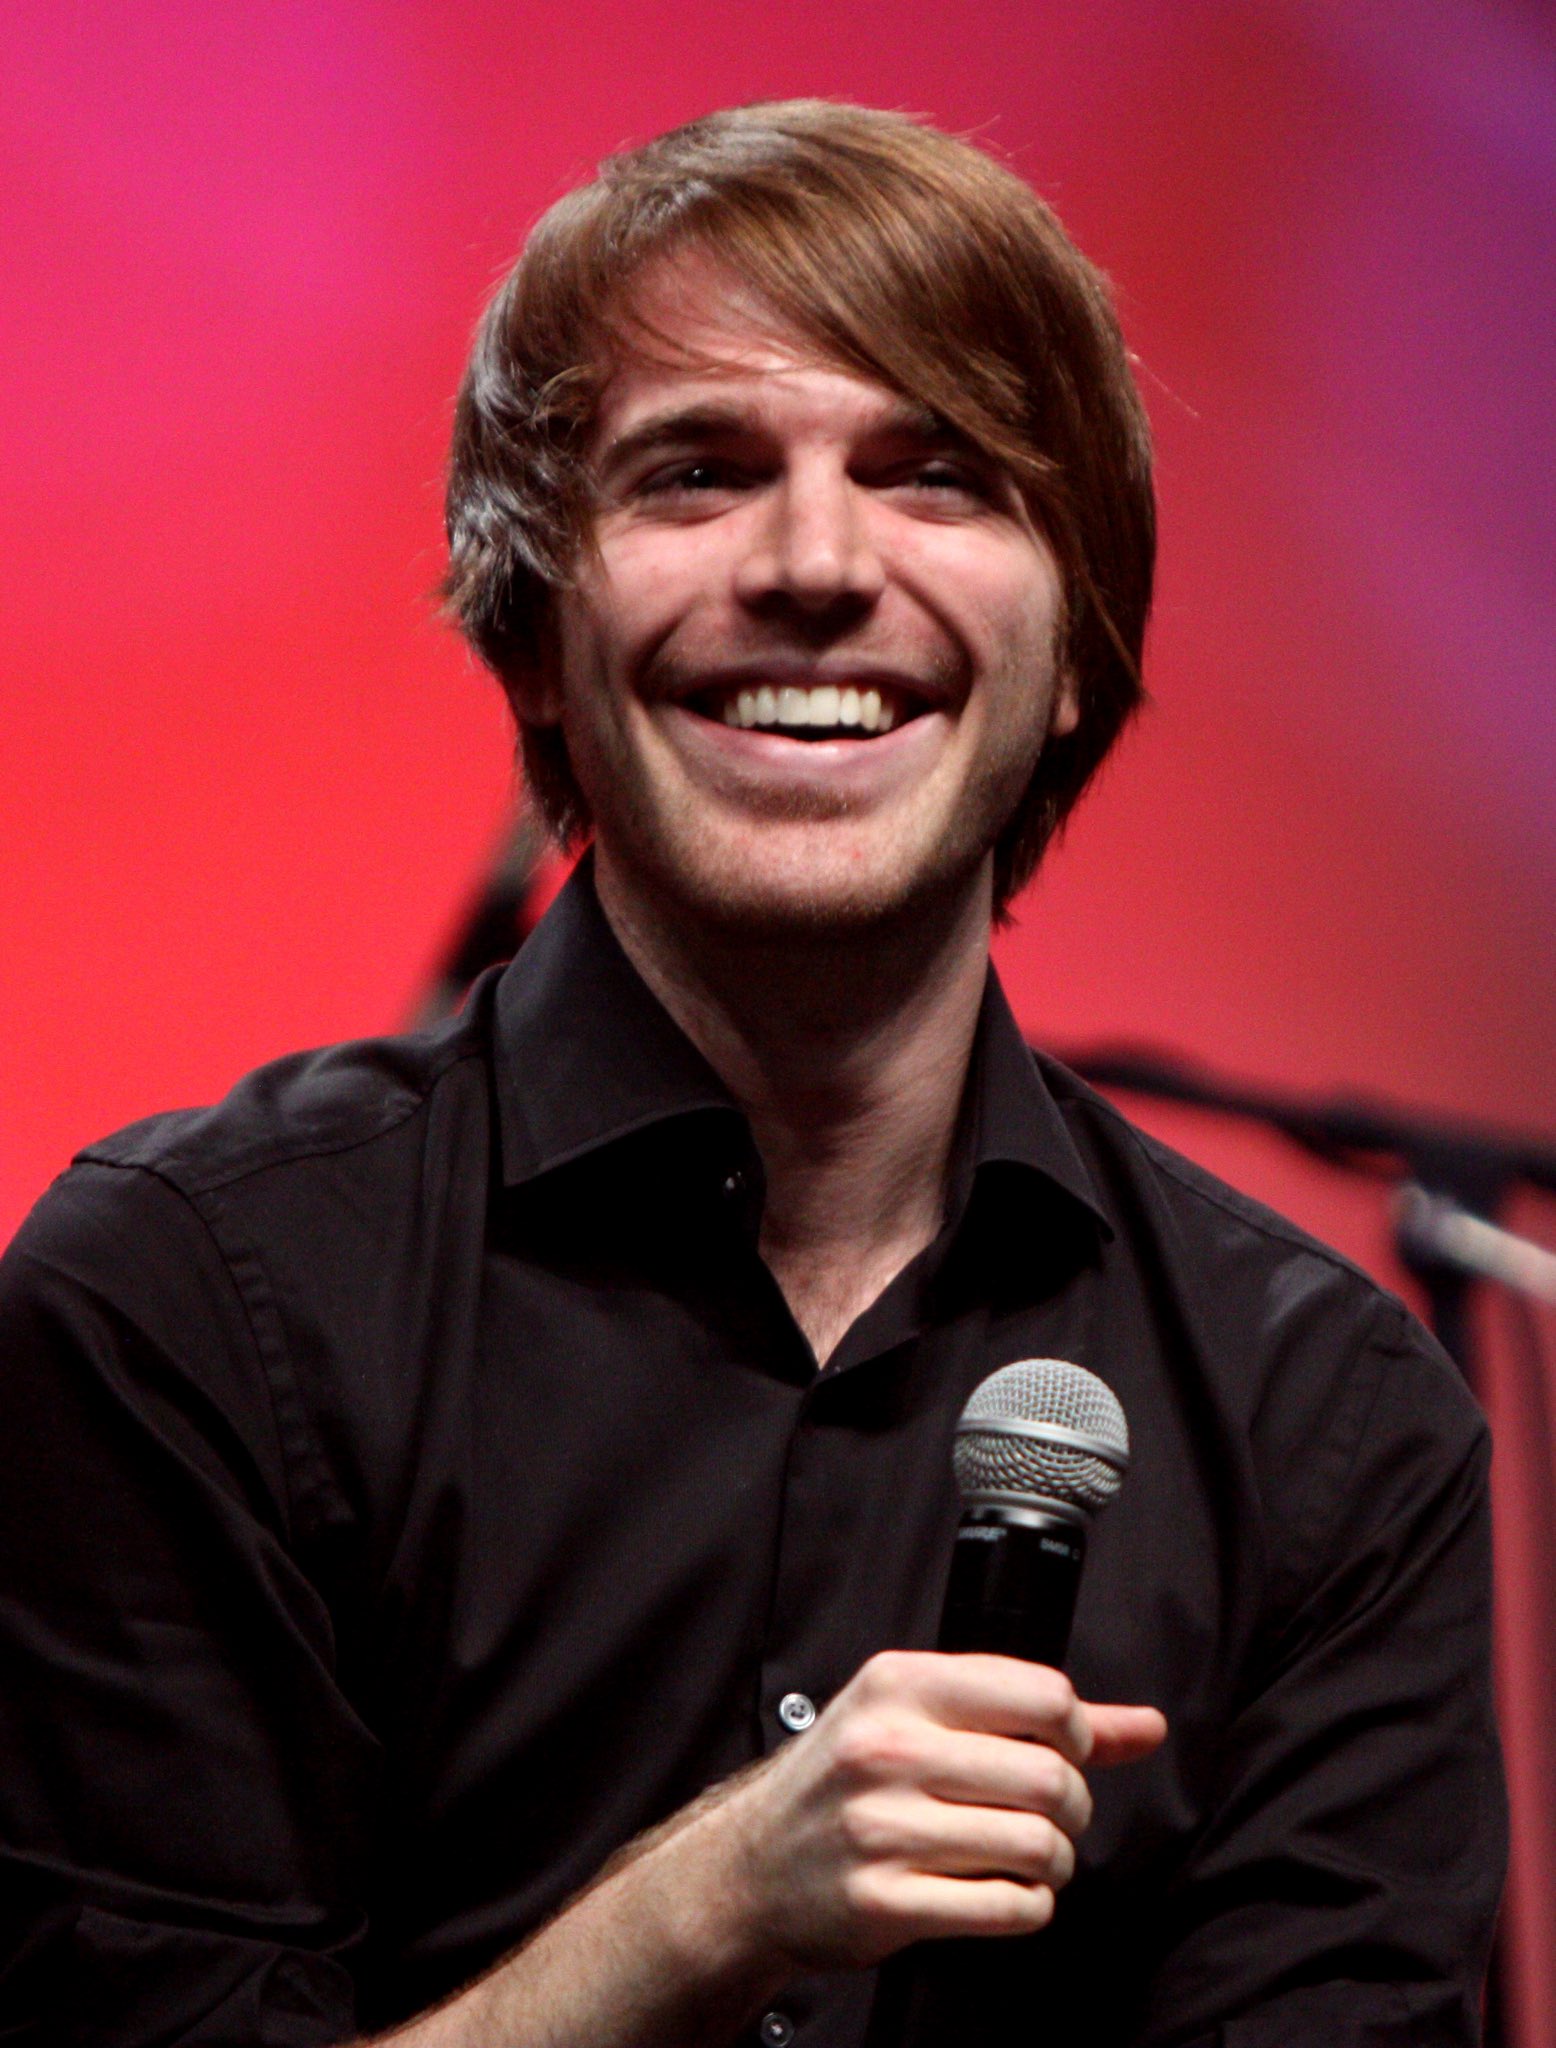 Happy 30th Birthday to YouTuber and actor, Shane Dawson! 